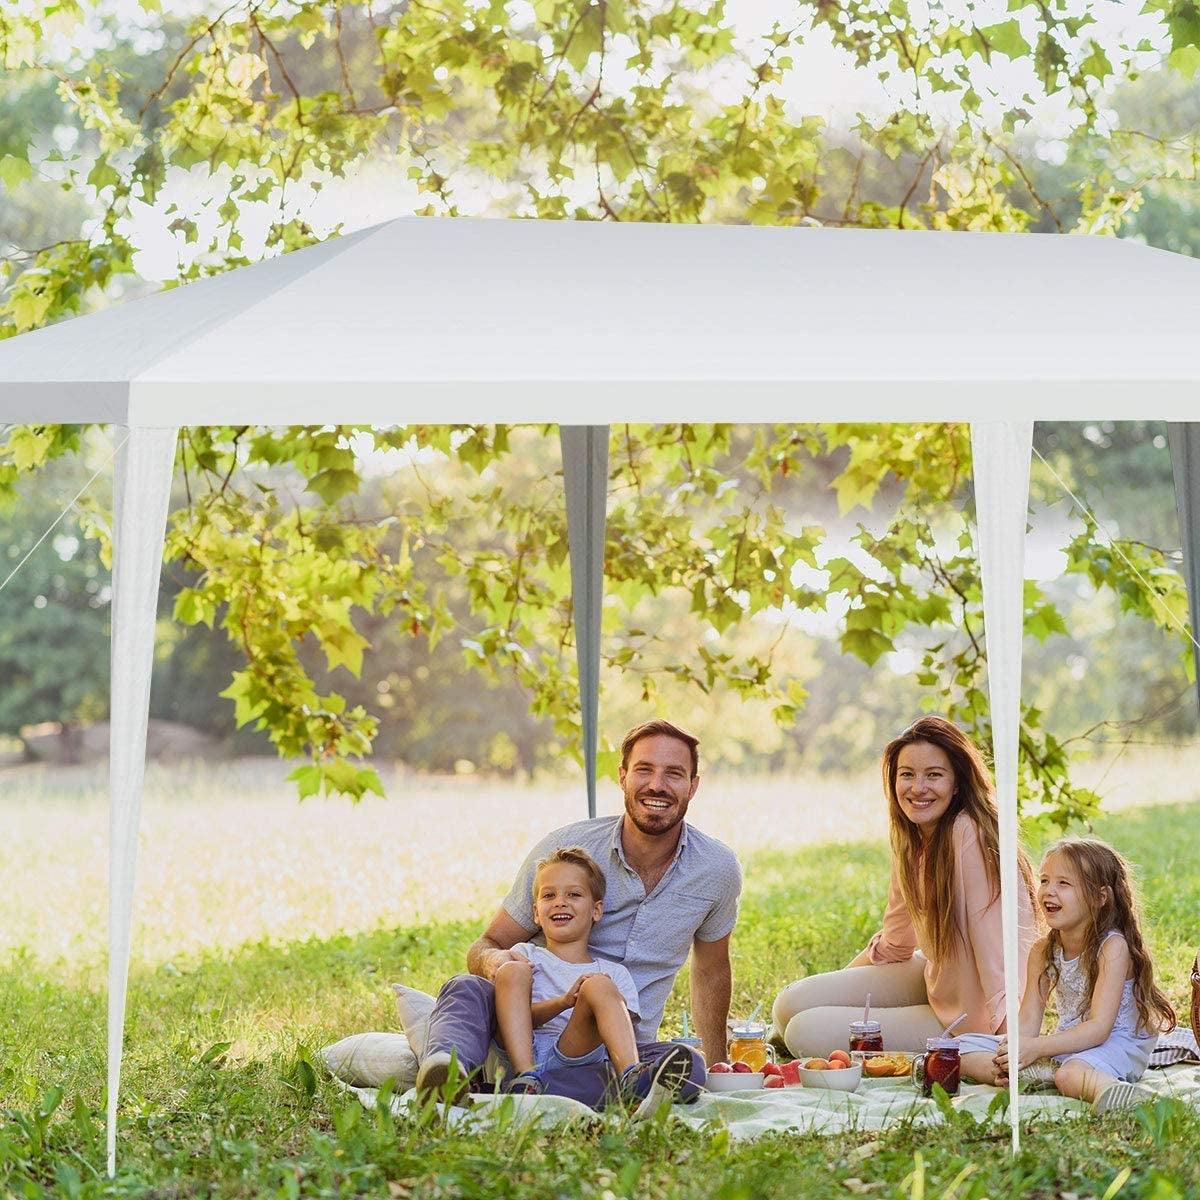 Robust and Durable Construction: Experience peace of mind with our outdoor tent, featuring a heavy-duty painted steel frame that ensures exceptional sturdiness and resistance to rust. Each tent is thoughtfully equipped with 6 wind ropes and 12 tent pegs to securely anchor it to the ground.